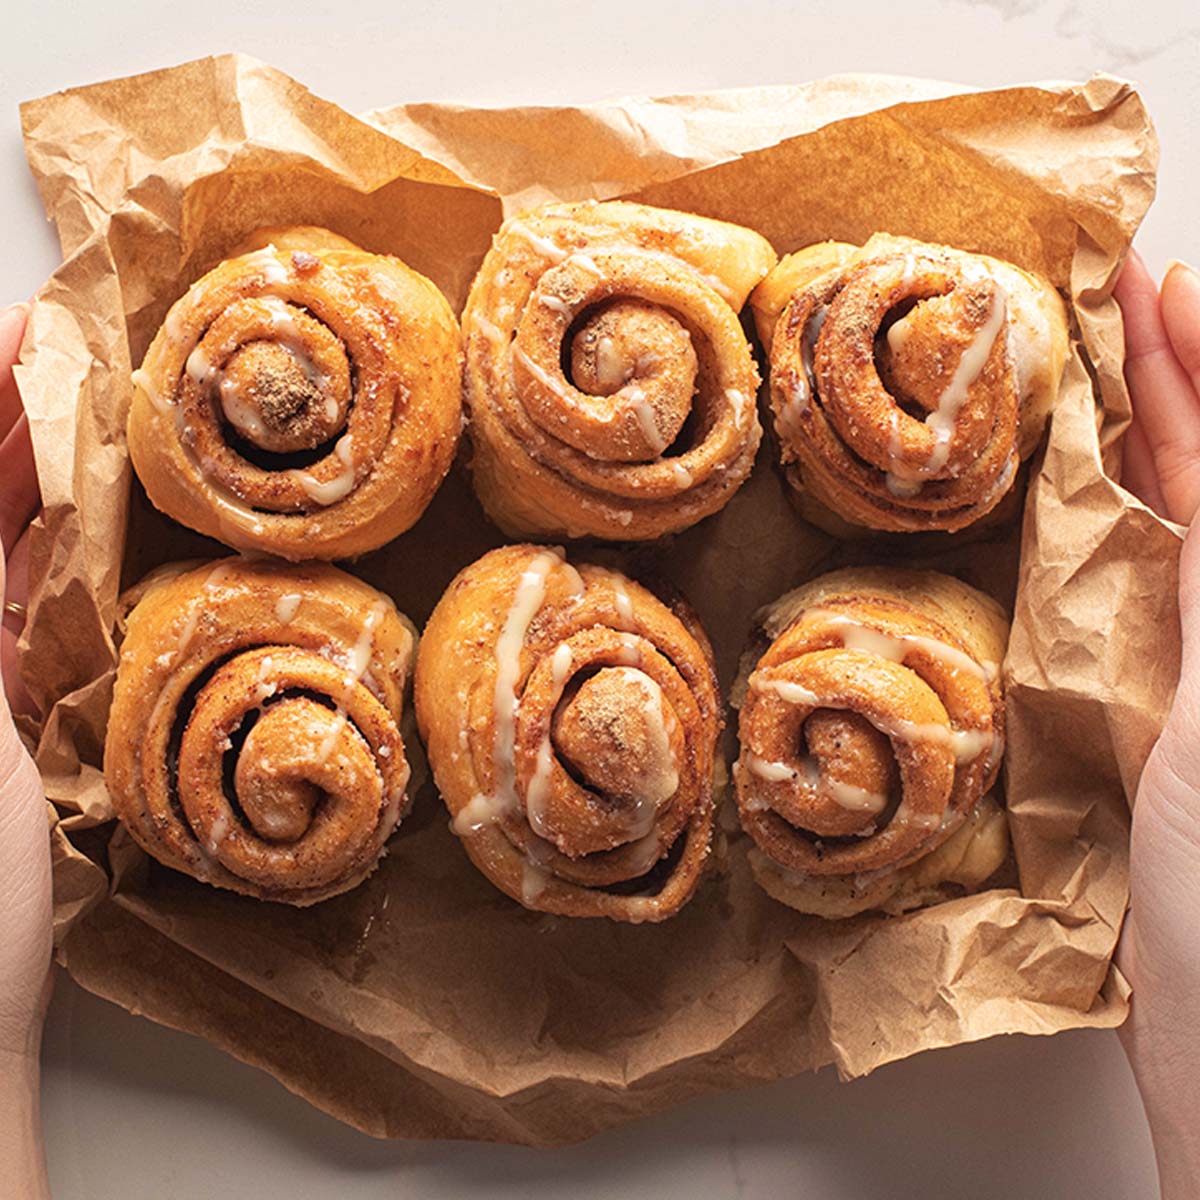 When it comes to reheating any frozen leftover cinnamon rolls, you need to allow them to defrost. This will do if left out at room temperature for an hour or so.